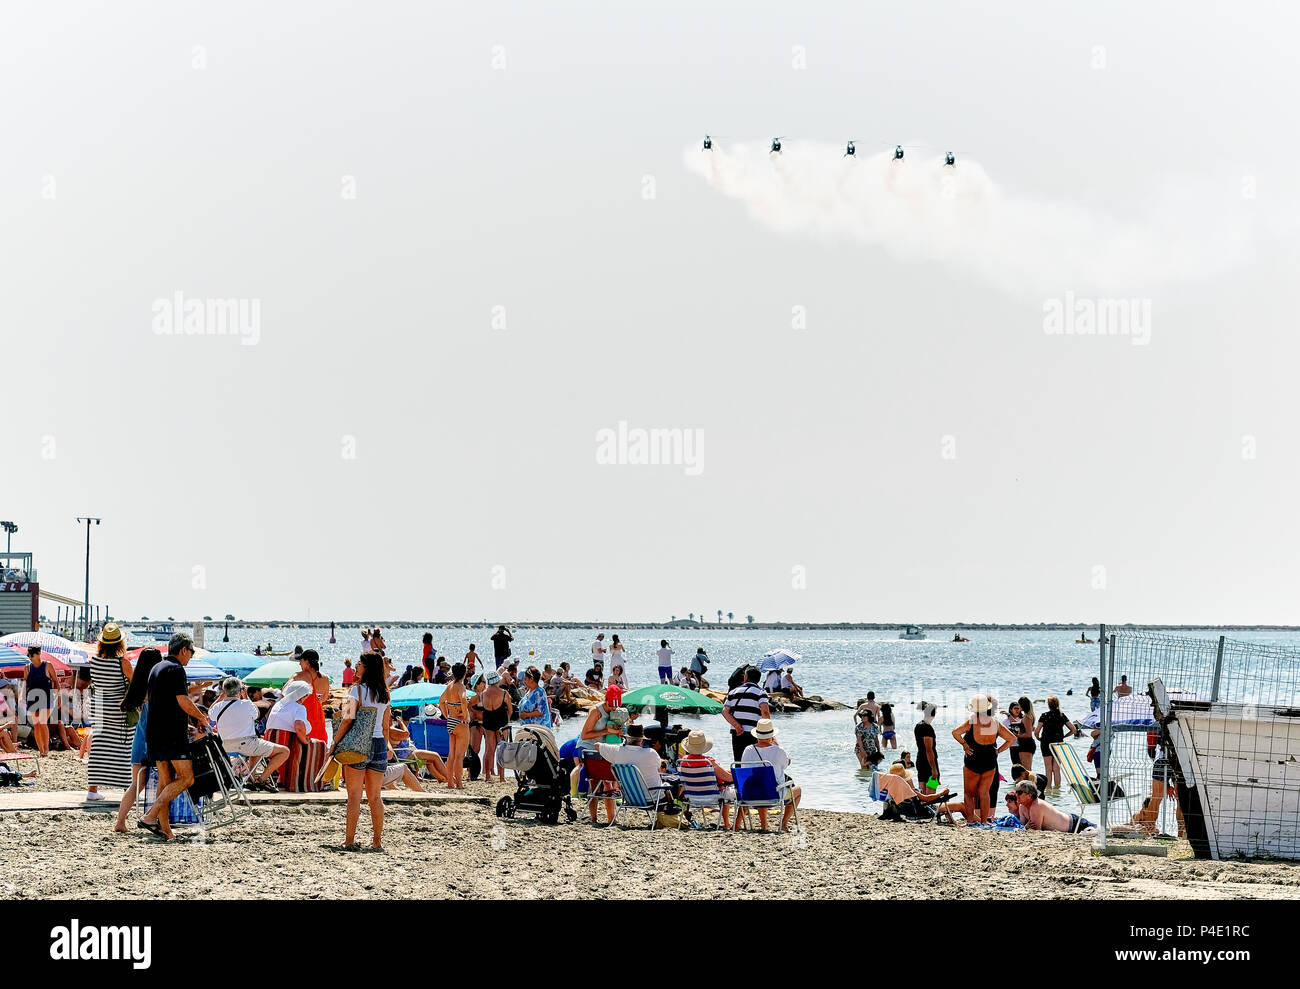 San Javier, Spain - June 10, 2018: San Javier Air Show. It is one of the most visually impressive events in the Murcia. Aerobatic teams accompanied by Stock Photo